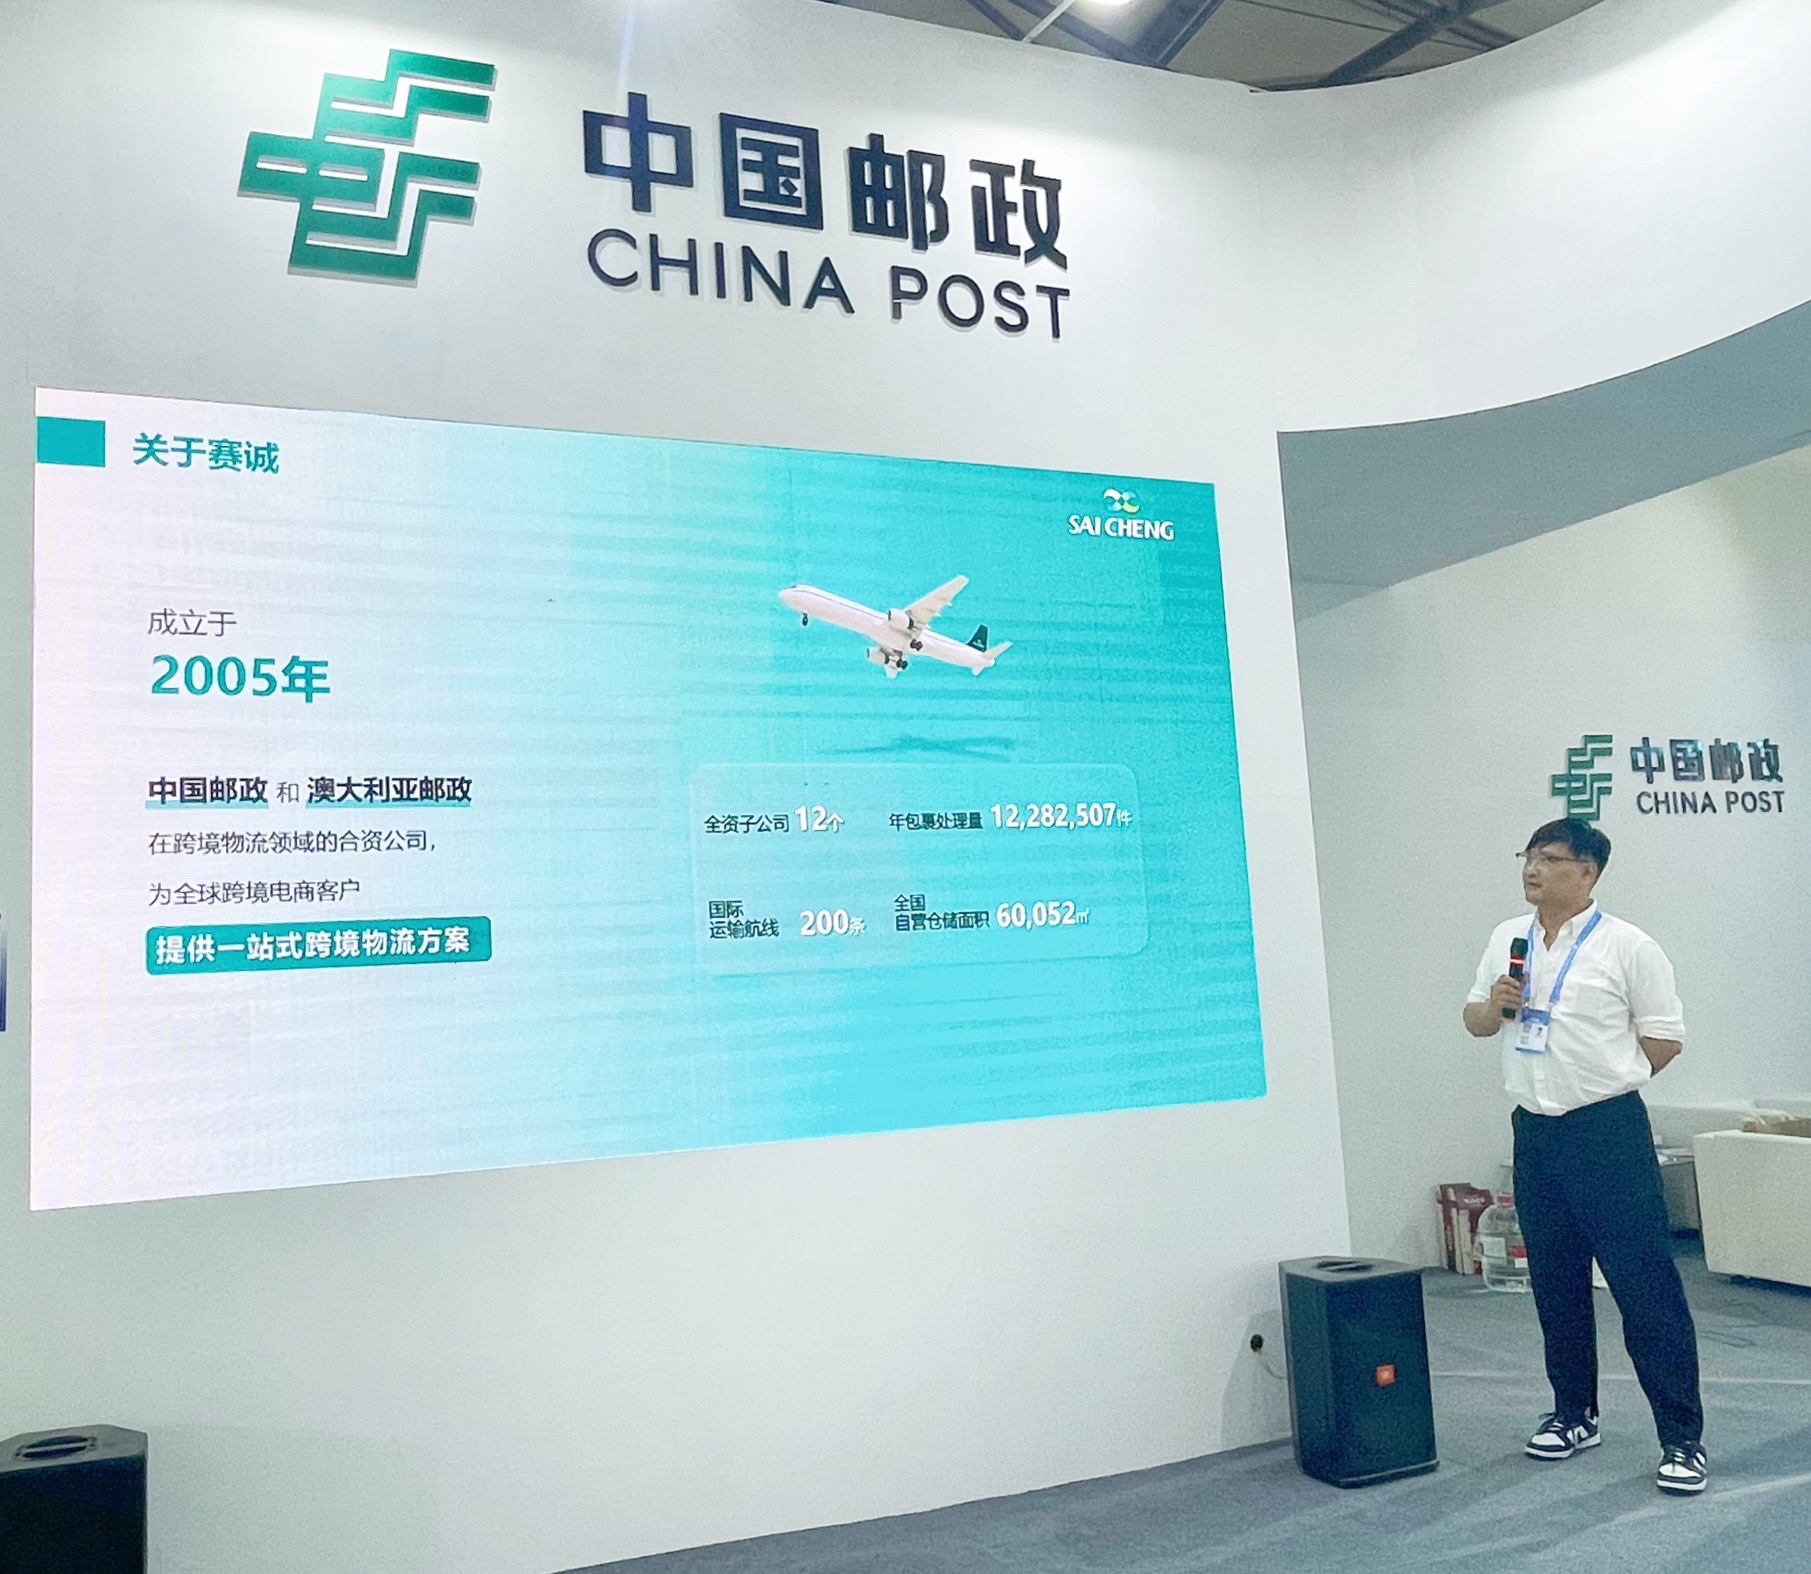 Sai Cheng appeared at the 2023 Shanghai cross-border e-commerce trade exhibition(图3)